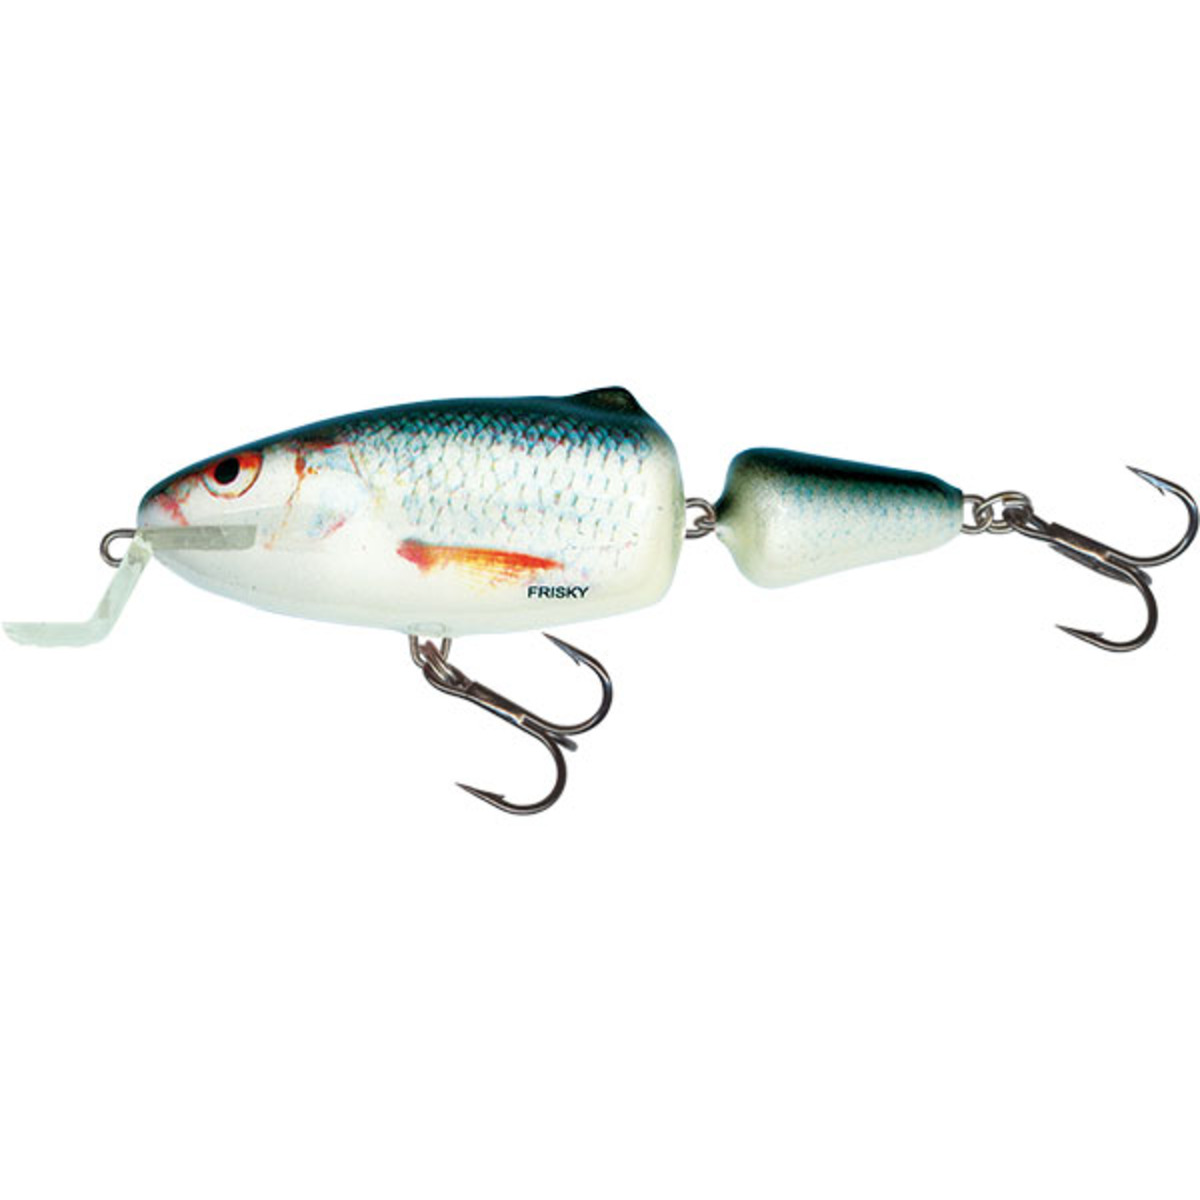 Salmo Frisky Shallow Runner - 7 Cm - Real Dace